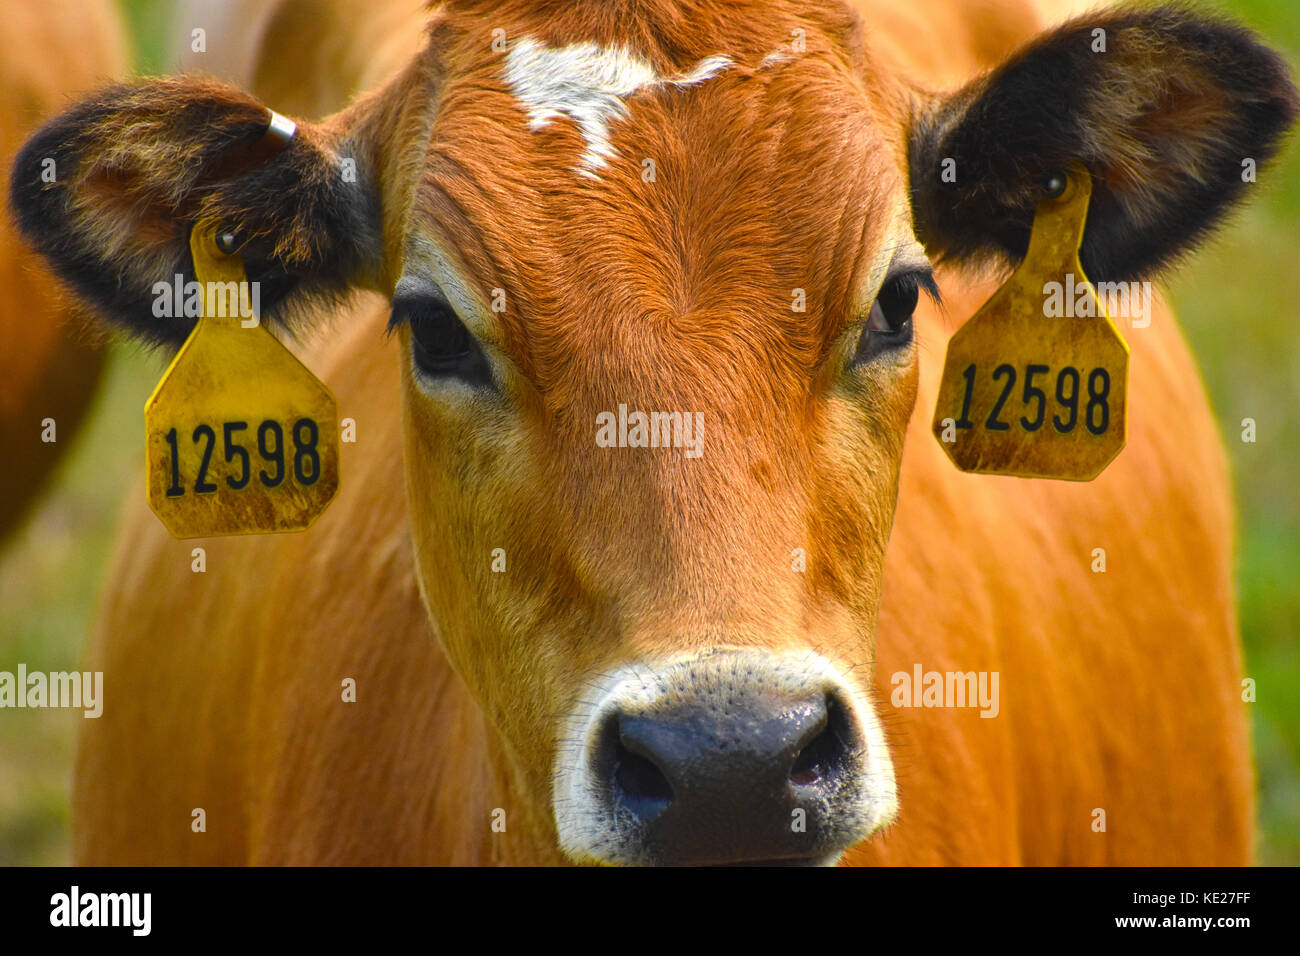 Cow Face and Head Closeup with Tags in her ears showing her identification number Stock Photo